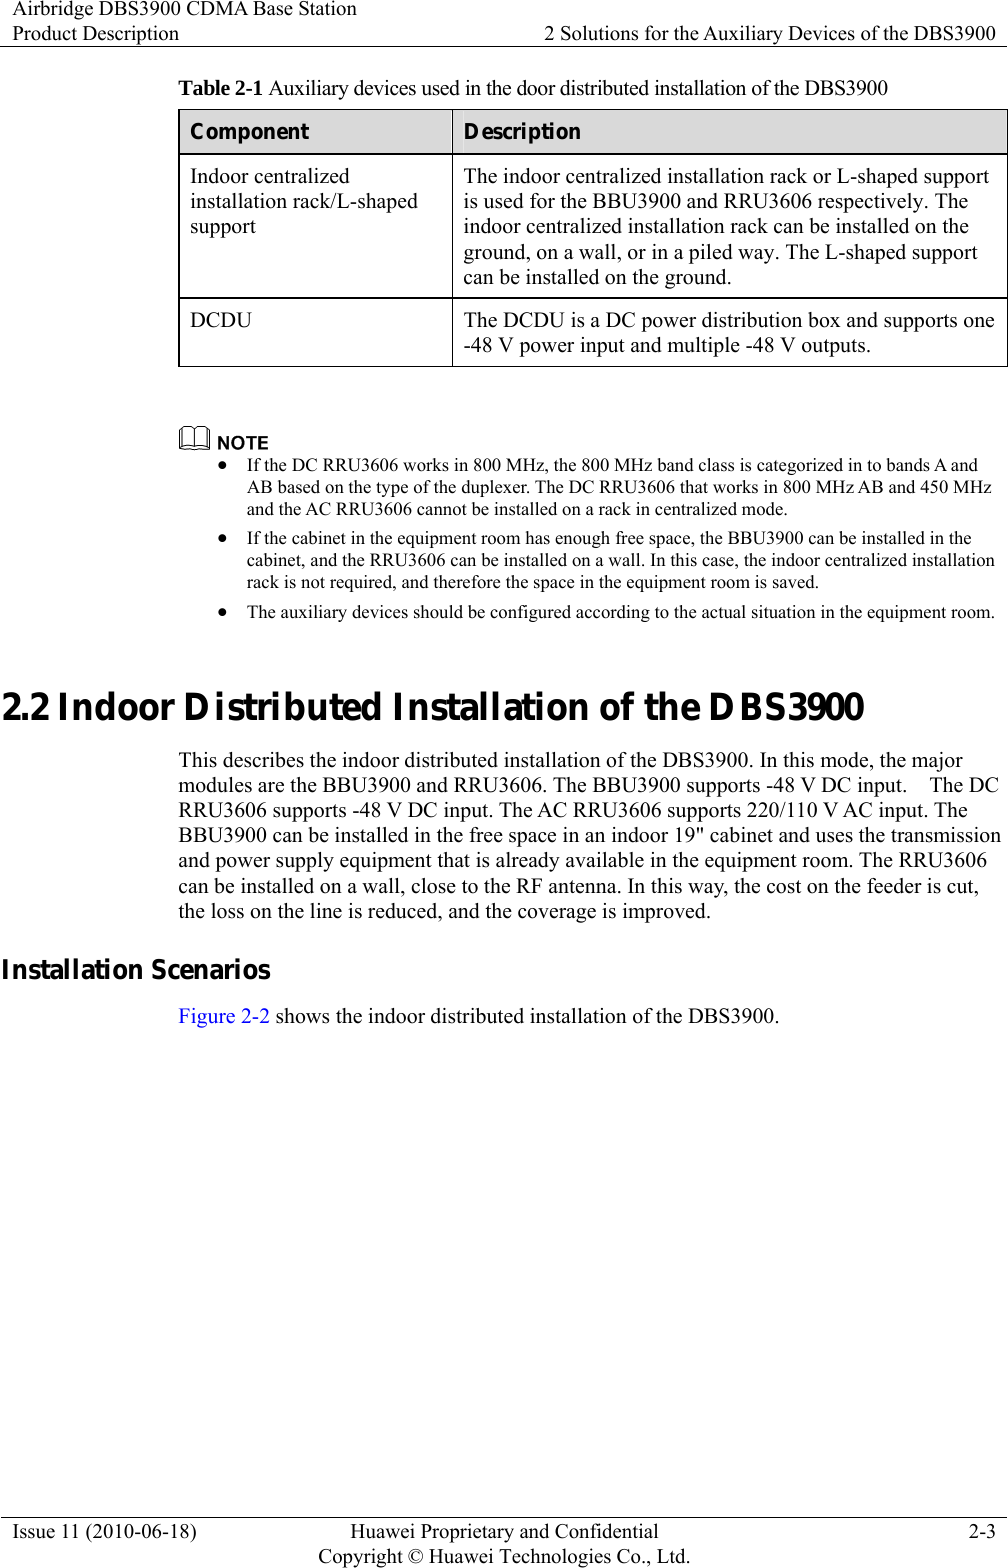 Airbridge DBS3900 CDMA Base Station Product Description  2 Solutions for the Auxiliary Devices of the DBS3900 Issue 11 (2010-06-18)  Huawei Proprietary and Confidential         Copyright © Huawei Technologies Co., Ltd.2-3 Table 2-1 Auxiliary devices used in the door distributed installation of the DBS3900 Component  Description Indoor centralized installation rack/L-shaped support The indoor centralized installation rack or L-shaped support is used for the BBU3900 and RRU3606 respectively. The indoor centralized installation rack can be installed on the ground, on a wall, or in a piled way. The L-shaped support can be installed on the ground. DCDU  The DCDU is a DC power distribution box and supports one -48 V power input and multiple -48 V outputs.   z If the DC RRU3606 works in 800 MHz, the 800 MHz band class is categorized in to bands A and AB based on the type of the duplexer. The DC RRU3606 that works in 800 MHz AB and 450 MHz and the AC RRU3606 cannot be installed on a rack in centralized mode. z If the cabinet in the equipment room has enough free space, the BBU3900 can be installed in the cabinet, and the RRU3606 can be installed on a wall. In this case, the indoor centralized installation rack is not required, and therefore the space in the equipment room is saved. z The auxiliary devices should be configured according to the actual situation in the equipment room. 2.2 Indoor Distributed Installation of the DBS3900 This describes the indoor distributed installation of the DBS3900. In this mode, the major modules are the BBU3900 and RRU3606. The BBU3900 supports -48 V DC input.    The DC RRU3606 supports -48 V DC input. The AC RRU3606 supports 220/110 V AC input. The BBU3900 can be installed in the free space in an indoor 19&quot; cabinet and uses the transmission and power supply equipment that is already available in the equipment room. The RRU3606 can be installed on a wall, close to the RF antenna. In this way, the cost on the feeder is cut, the loss on the line is reduced, and the coverage is improved. Installation Scenarios Figure 2-2 shows the indoor distributed installation of the DBS3900. 